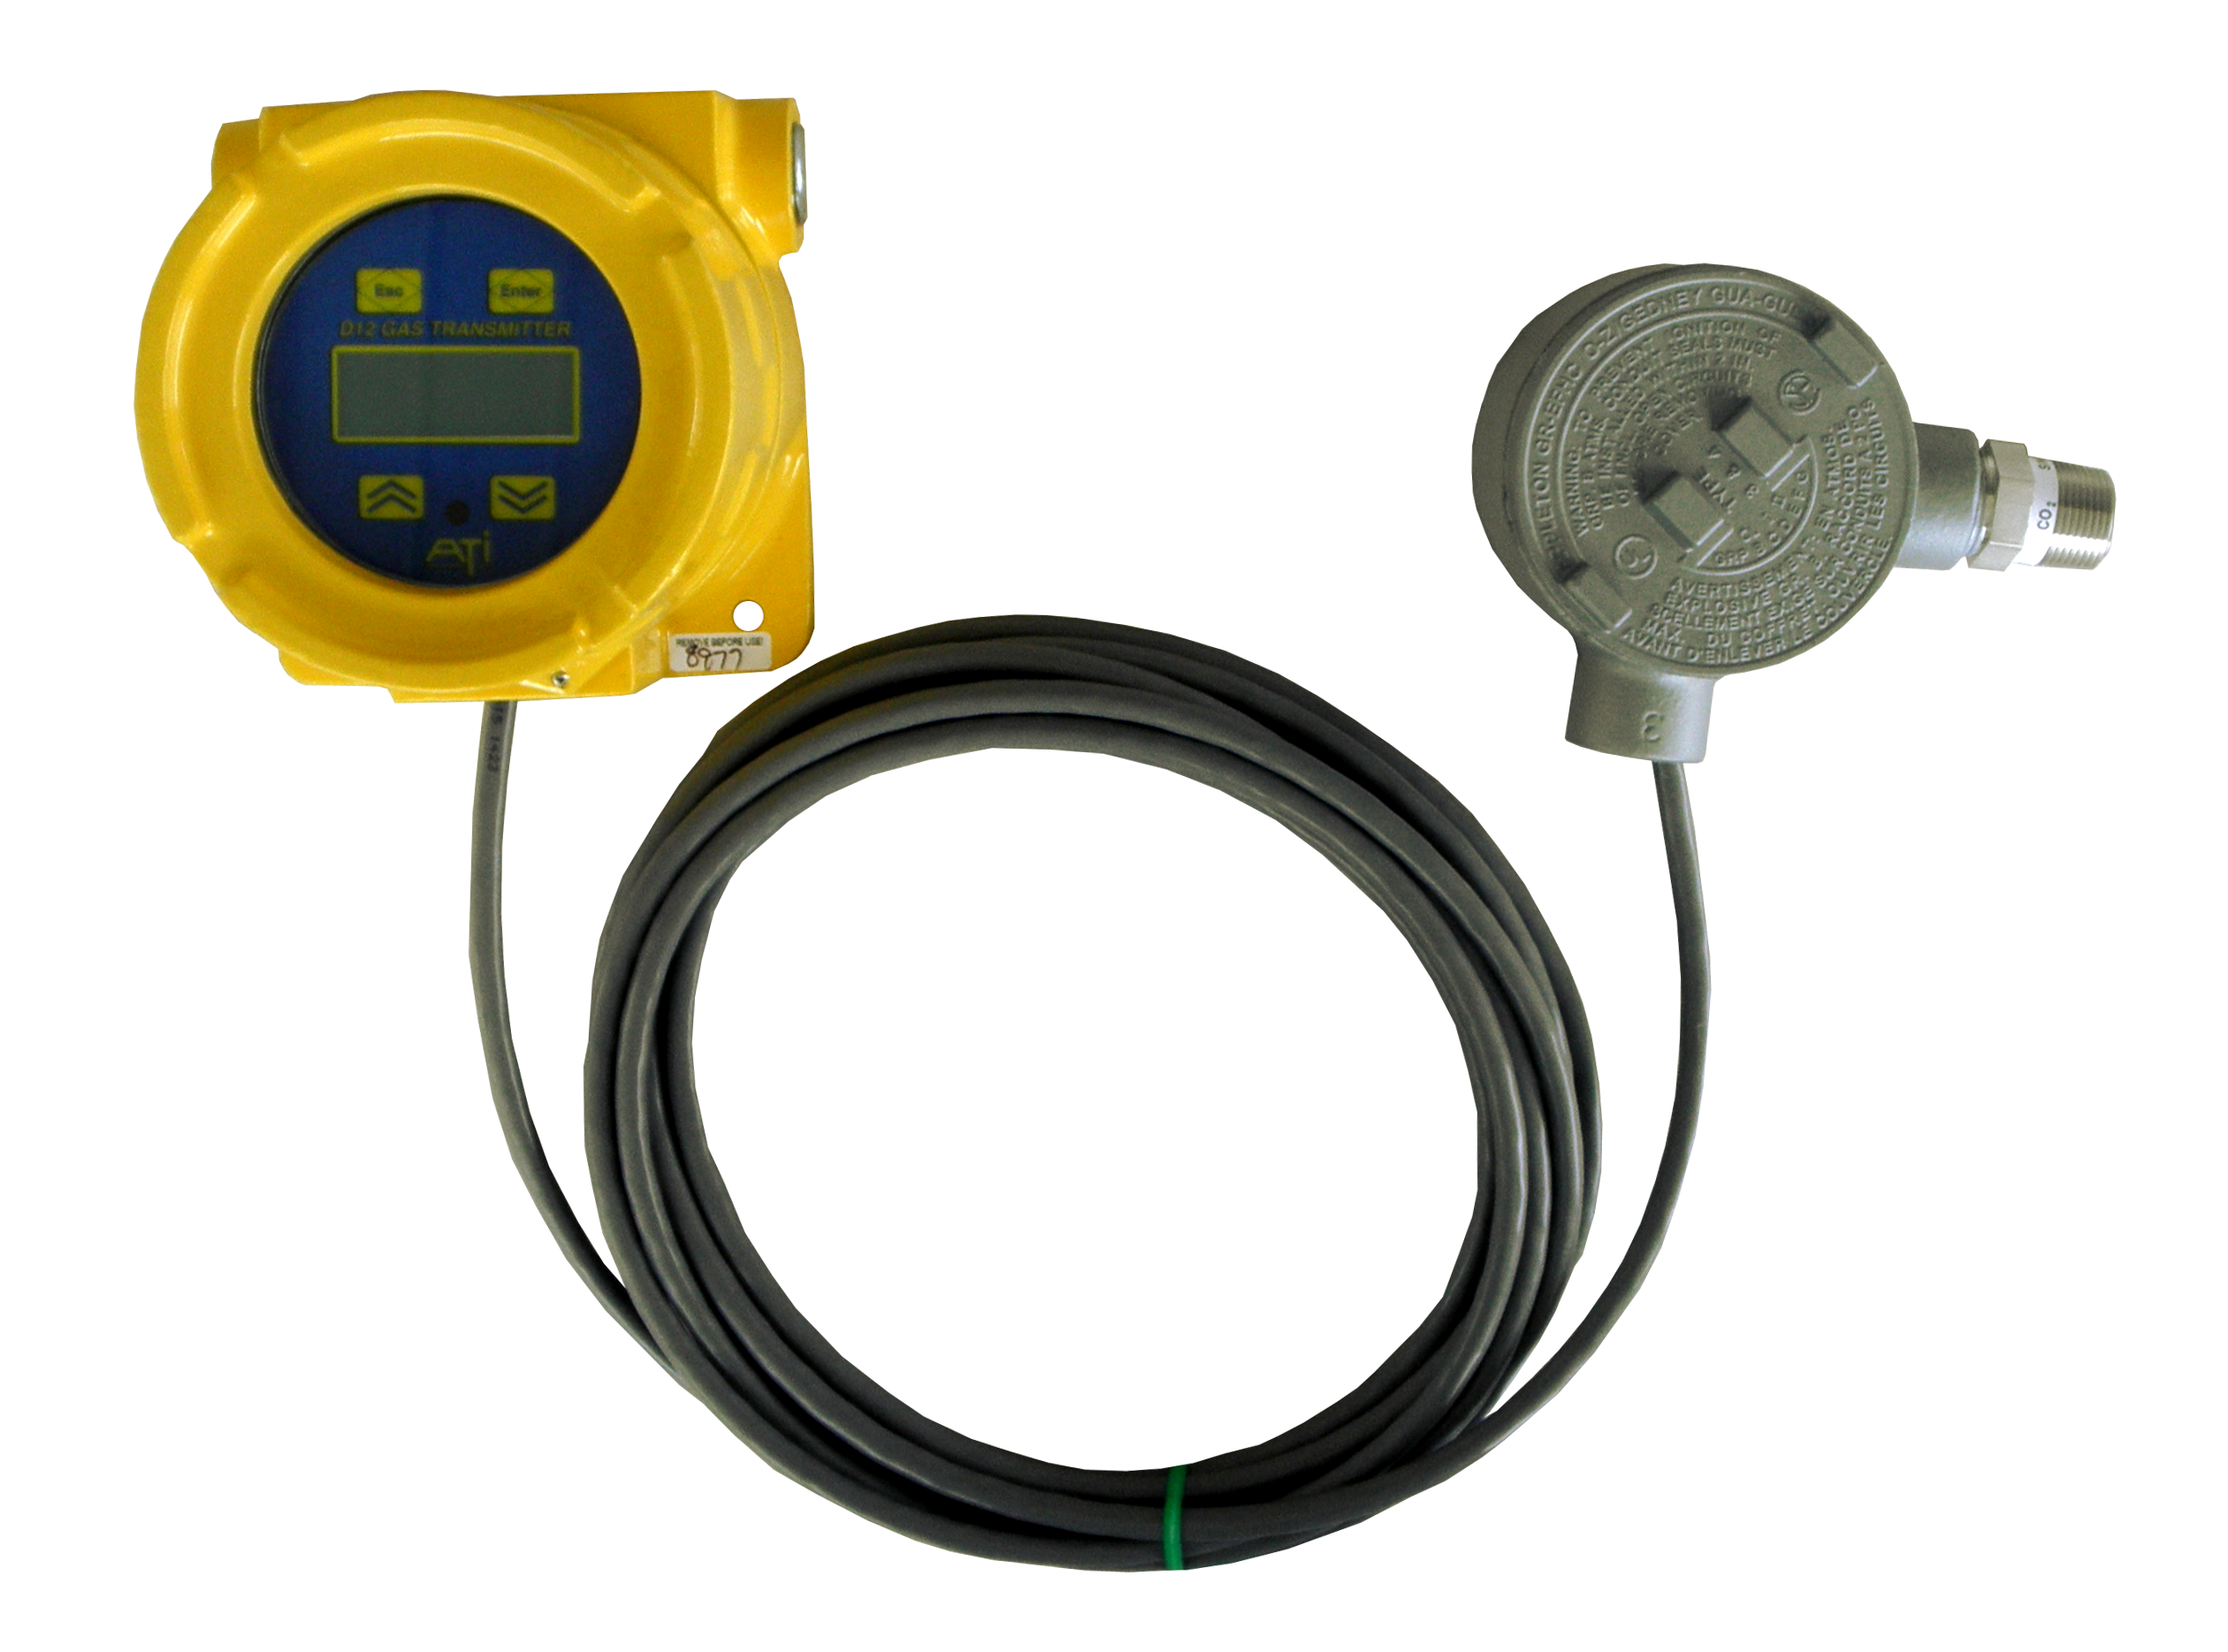 D12 Toxic Gas Transmitter with remote sensor